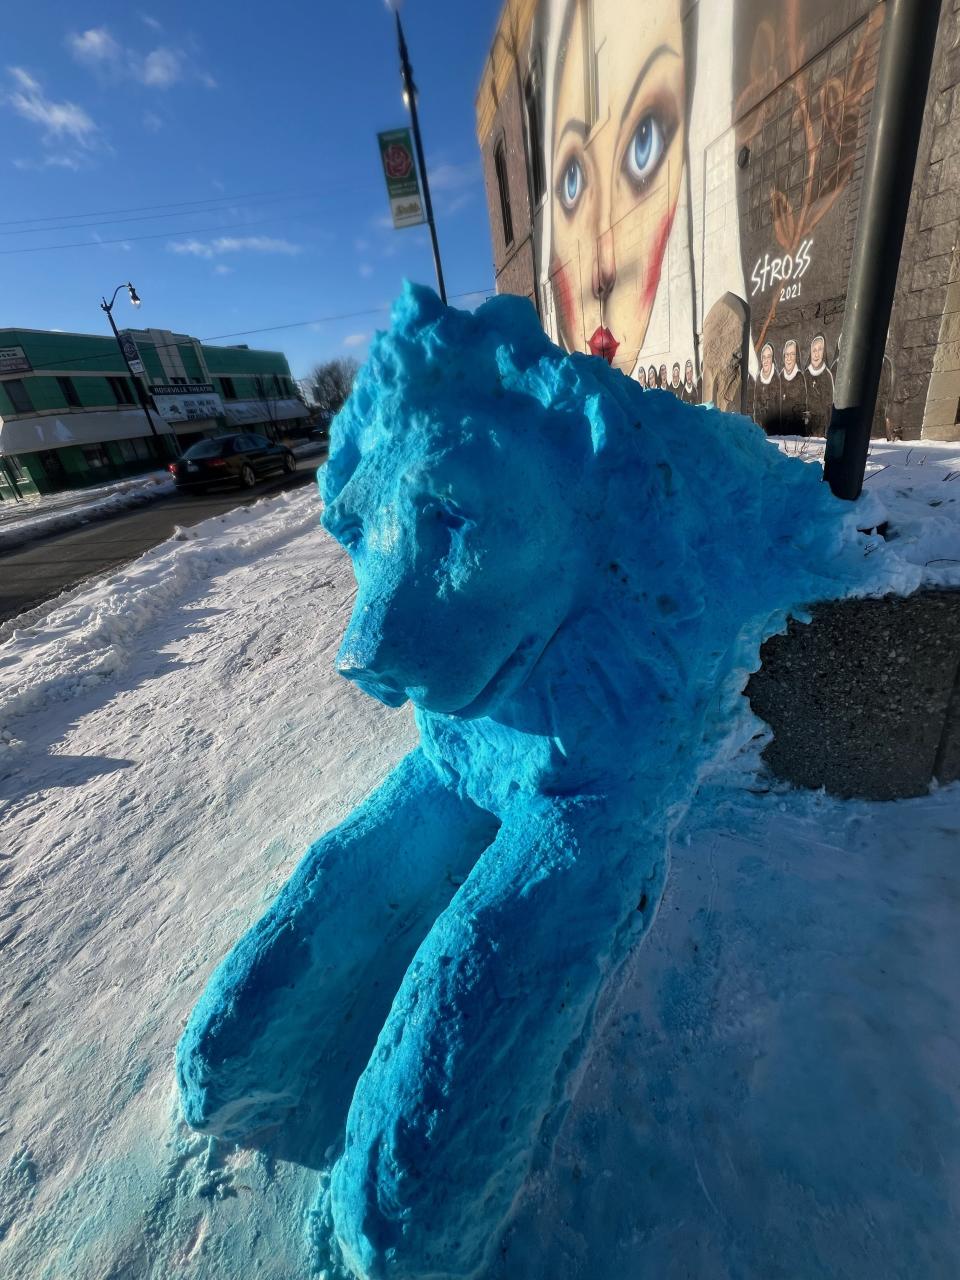 Edward Stross, an artist and self-proclaimed lifelong Lions fan, sculpted a lion outside his Roseville art studio out of snow to honor the Detroit team's winning season.